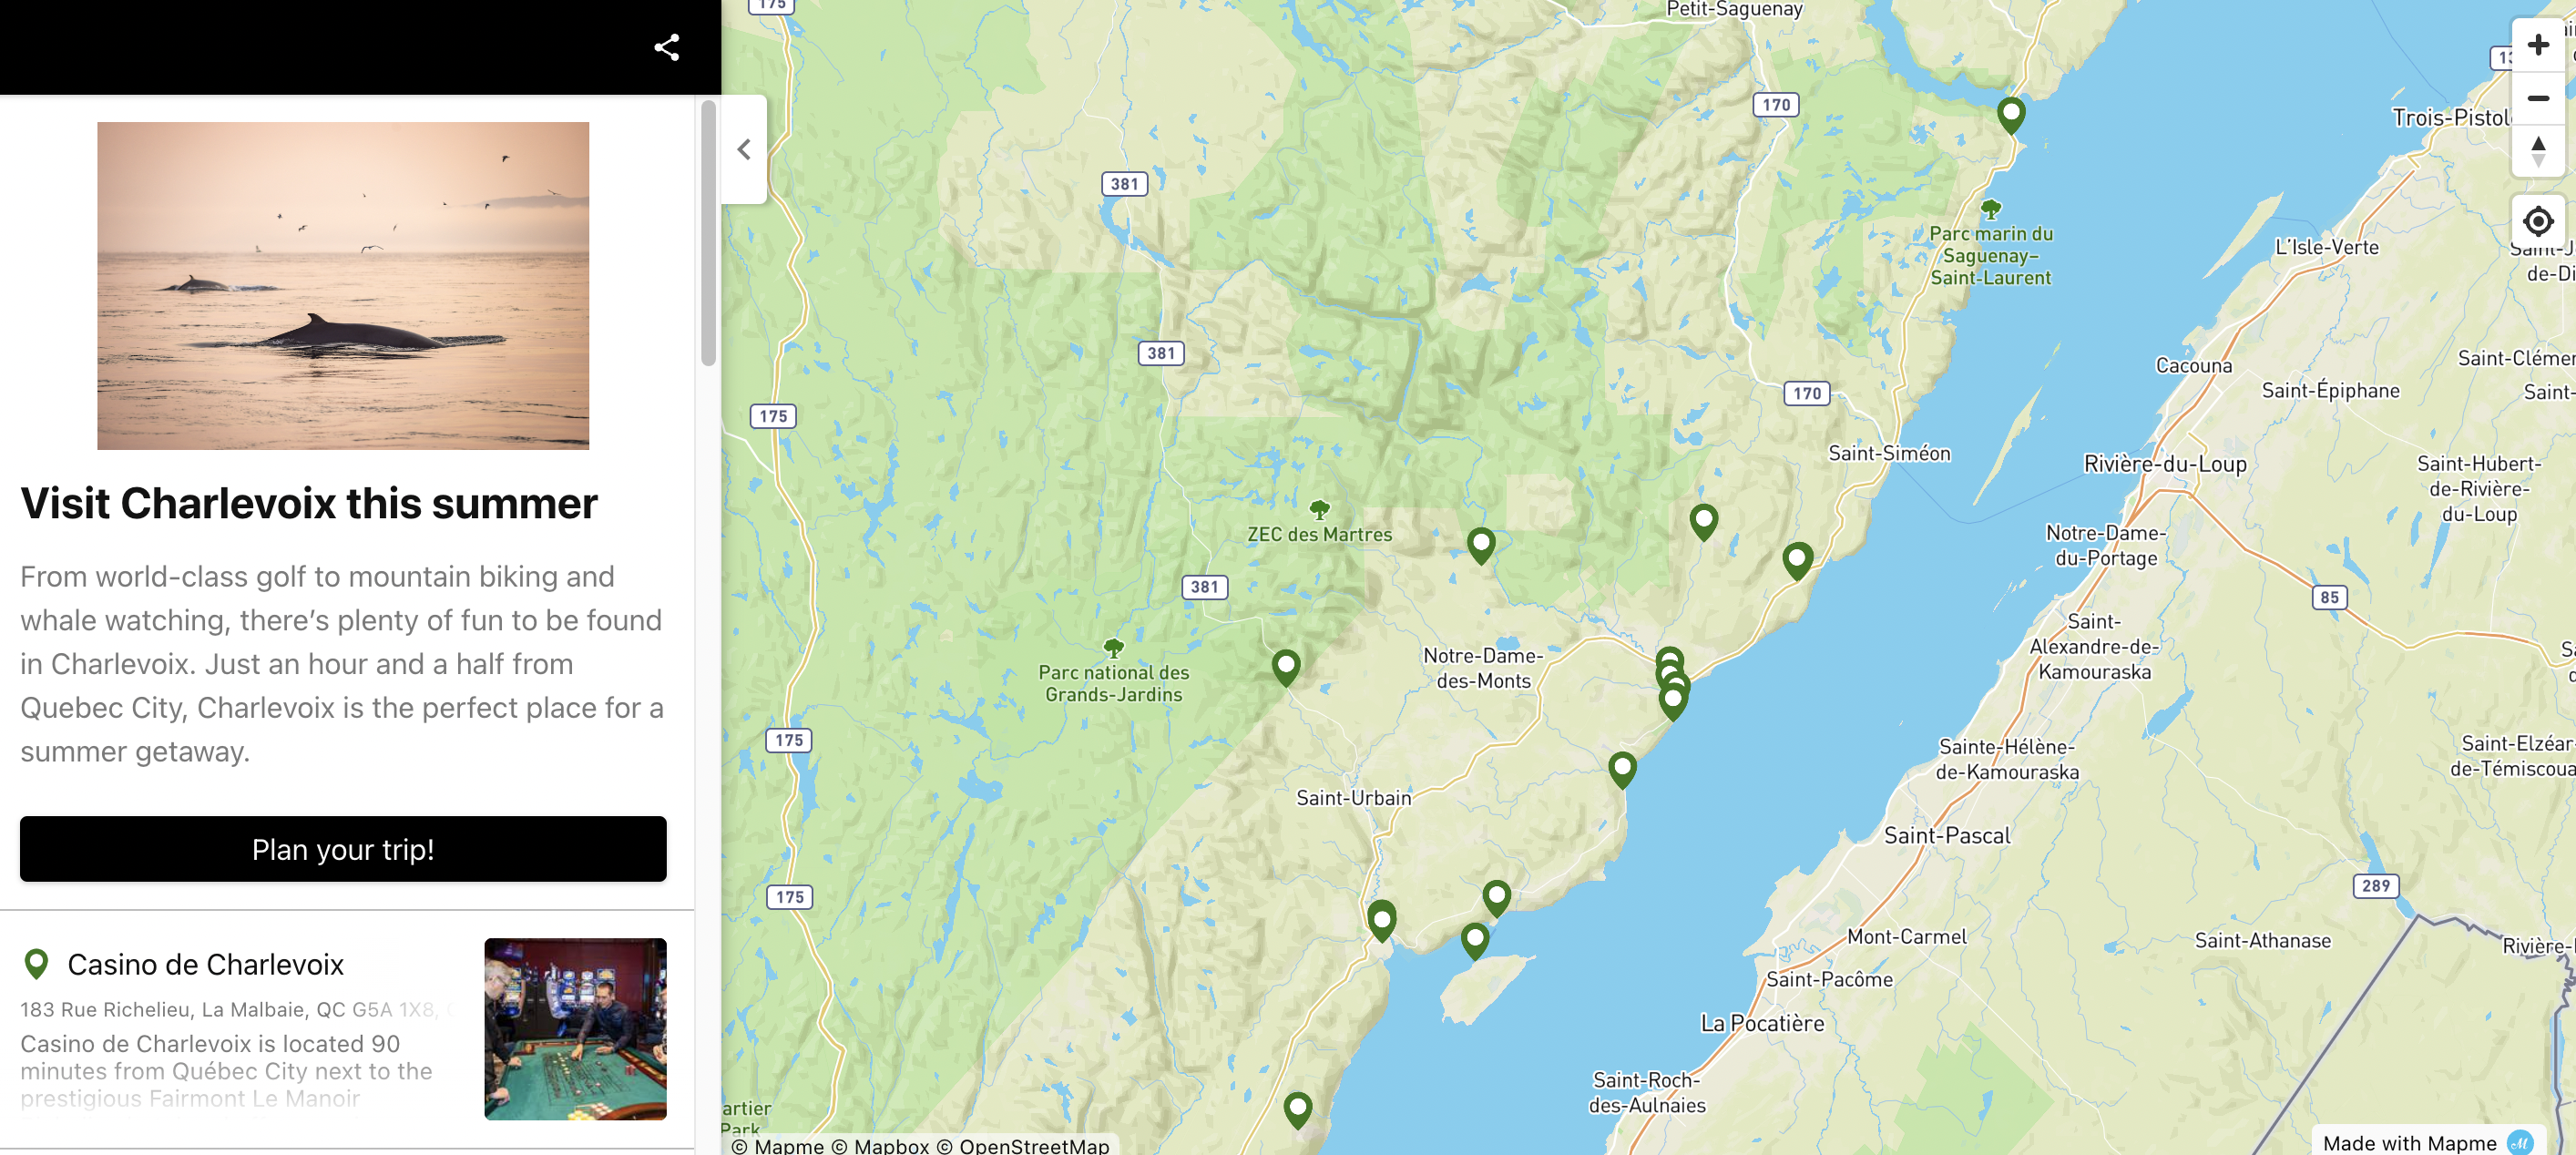 image of an interactive map of charlevoix